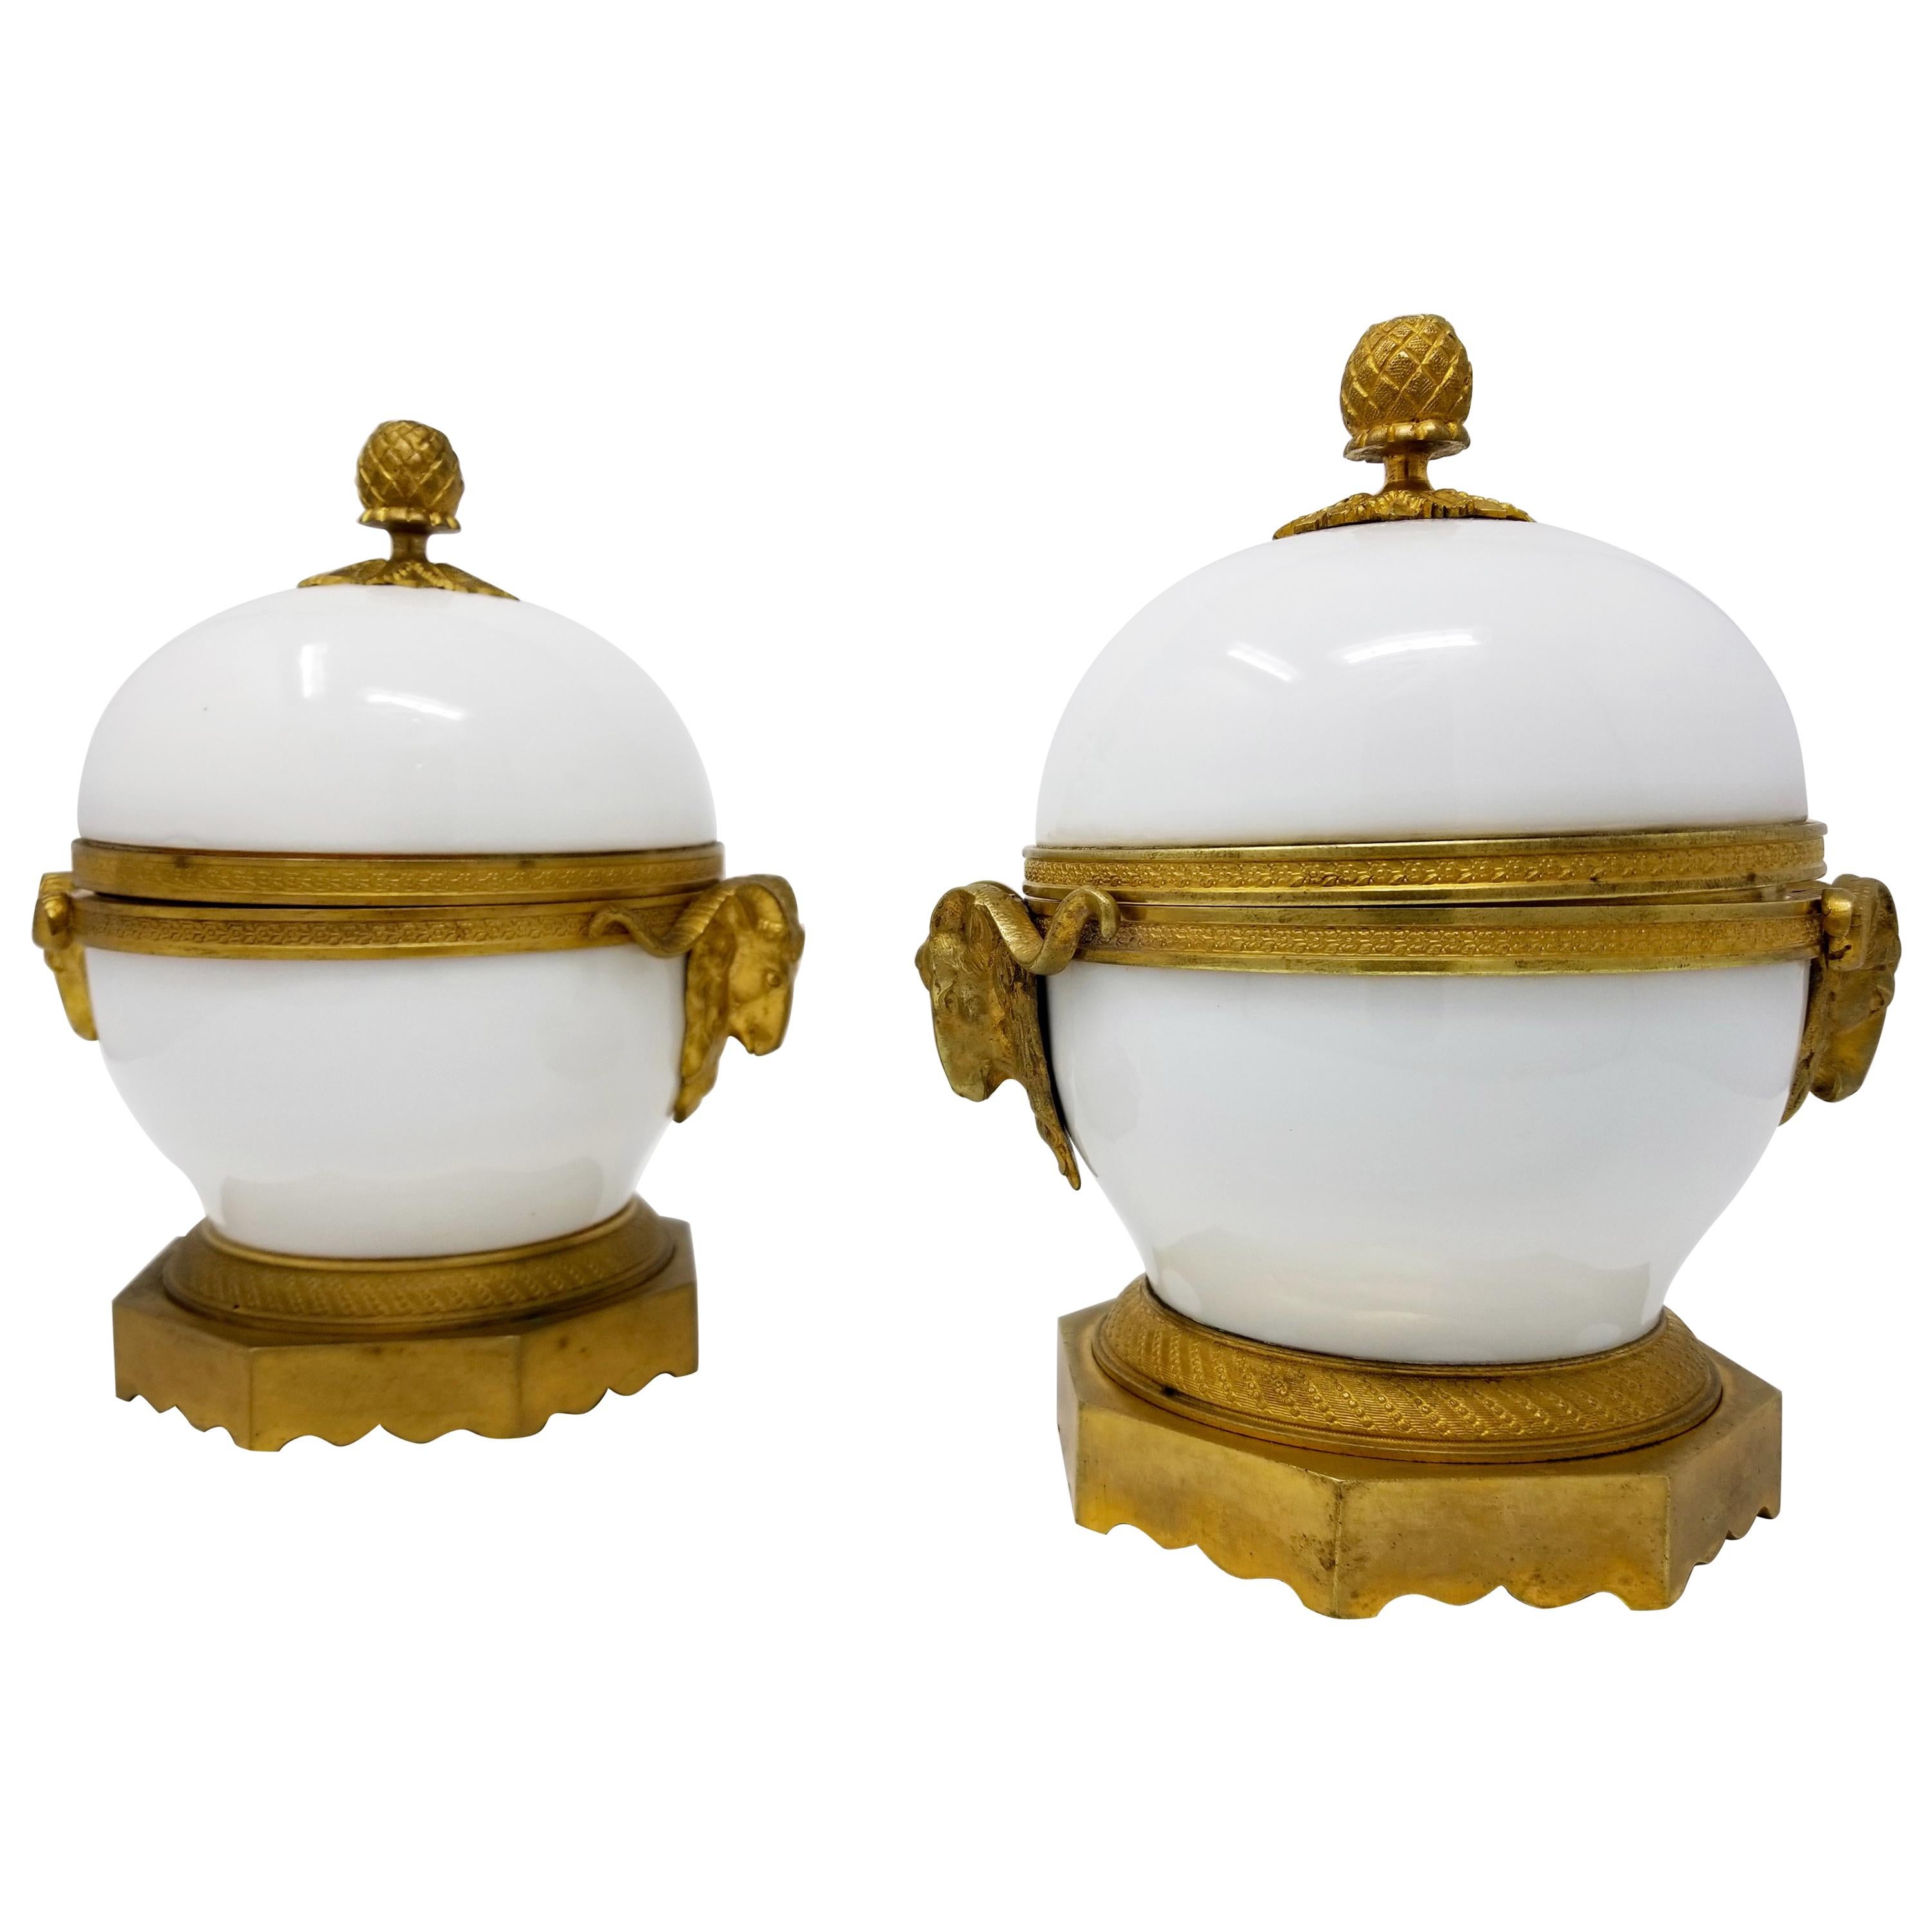 Pair of Louis XVI Ormolu Mounted White Porcelain and Dore Bronze Covered Bowls